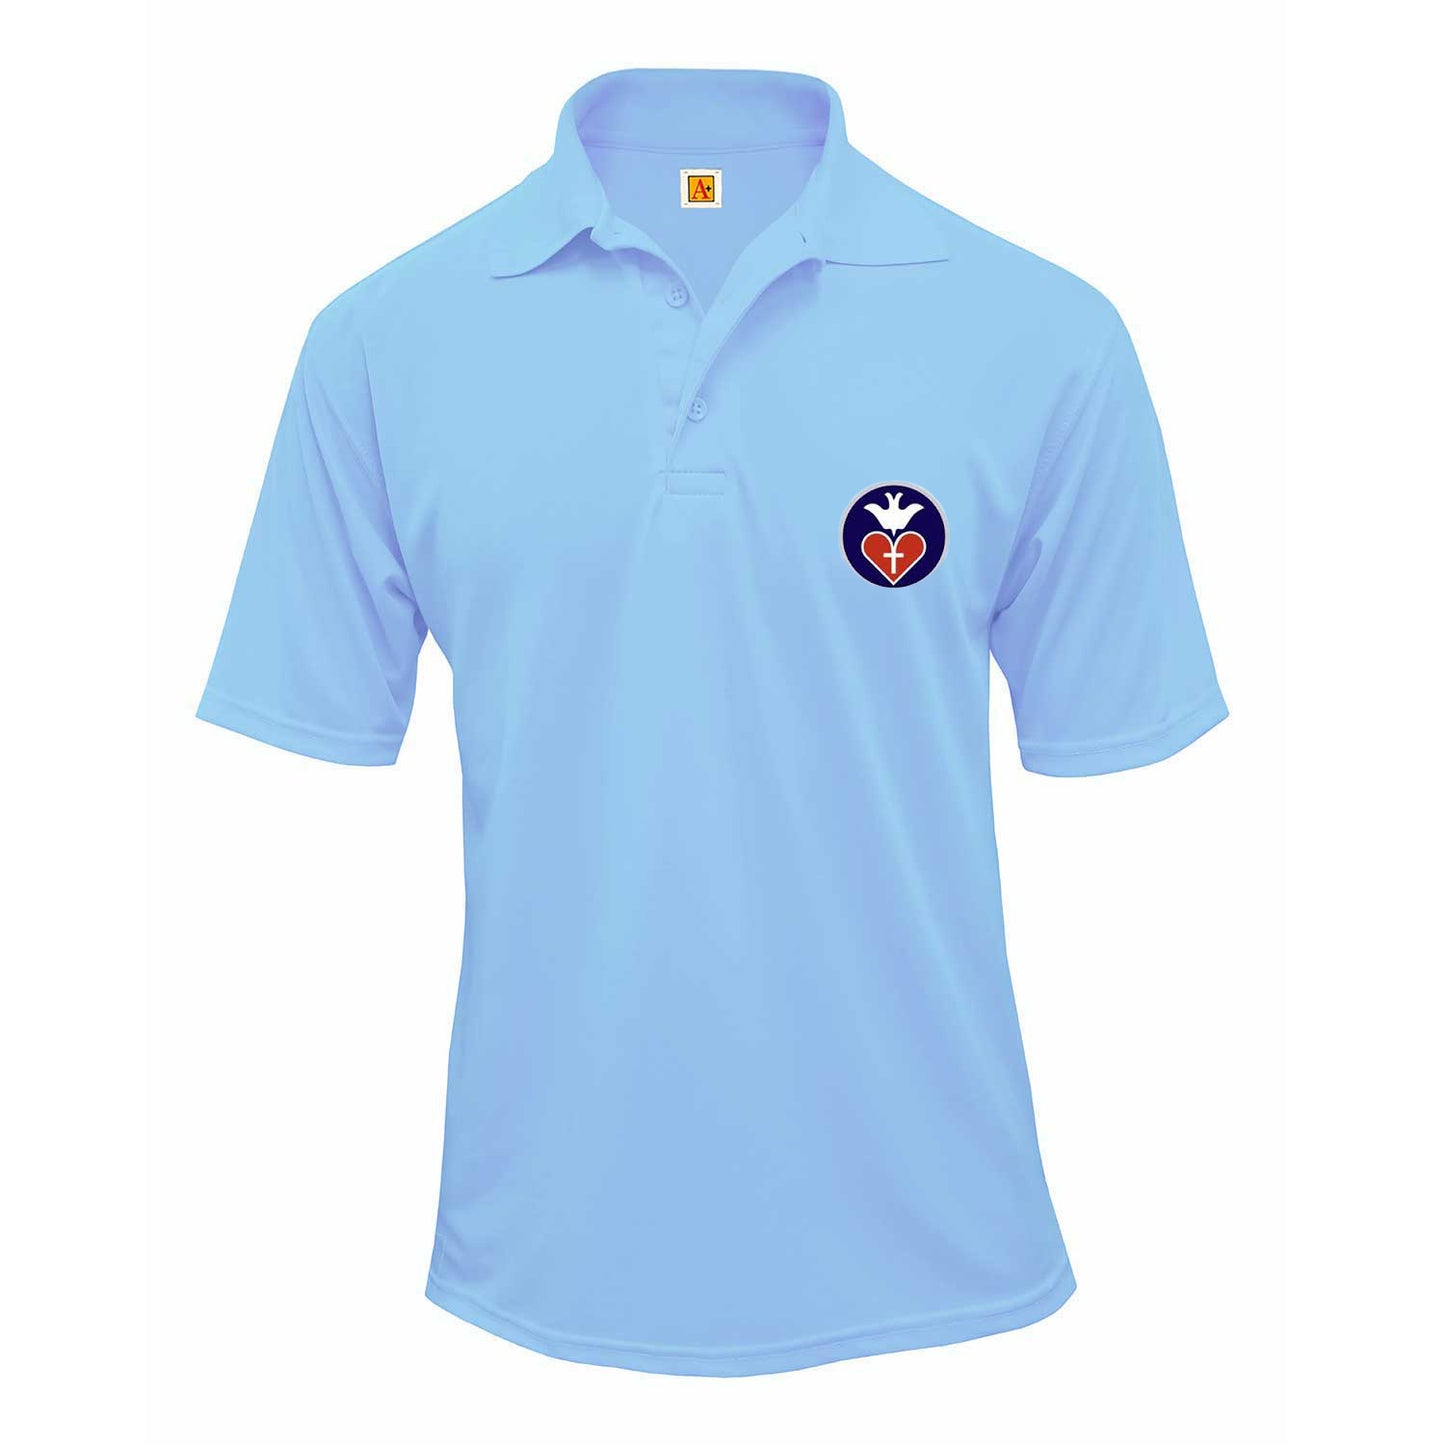 Youth Short Sleeve Performace Polo With St. Vincent De Paul Logo